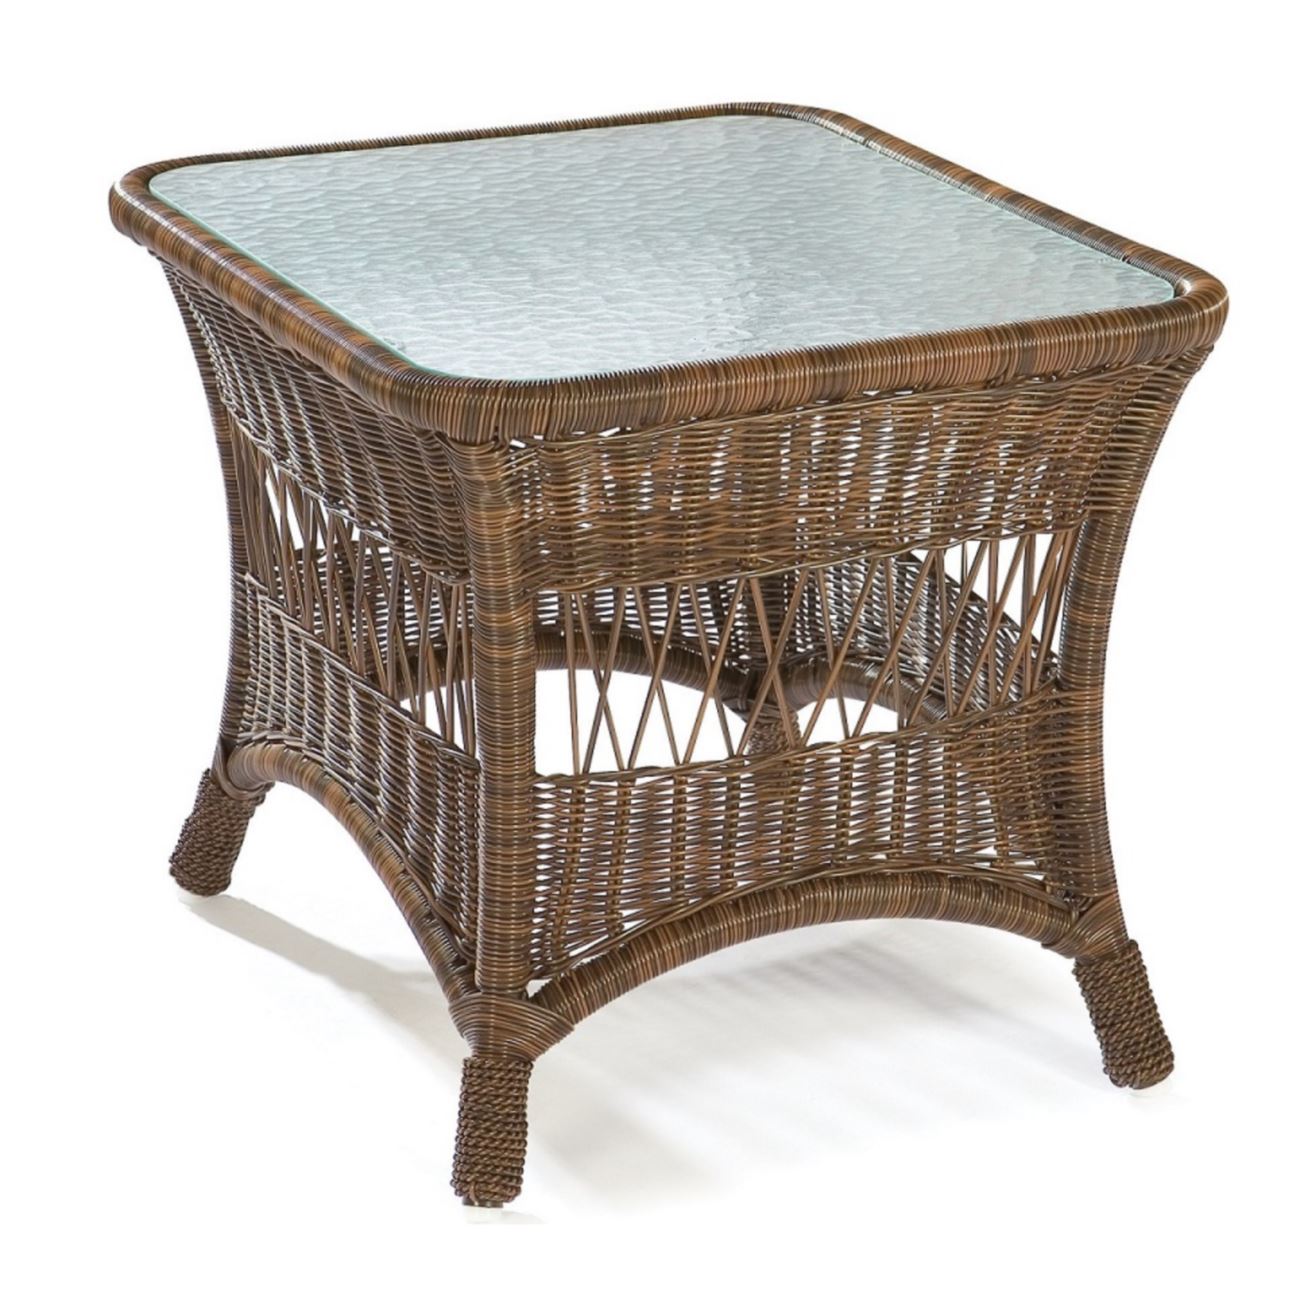 Bar Harbor Outdoor Wicker Accent Table photo - 8